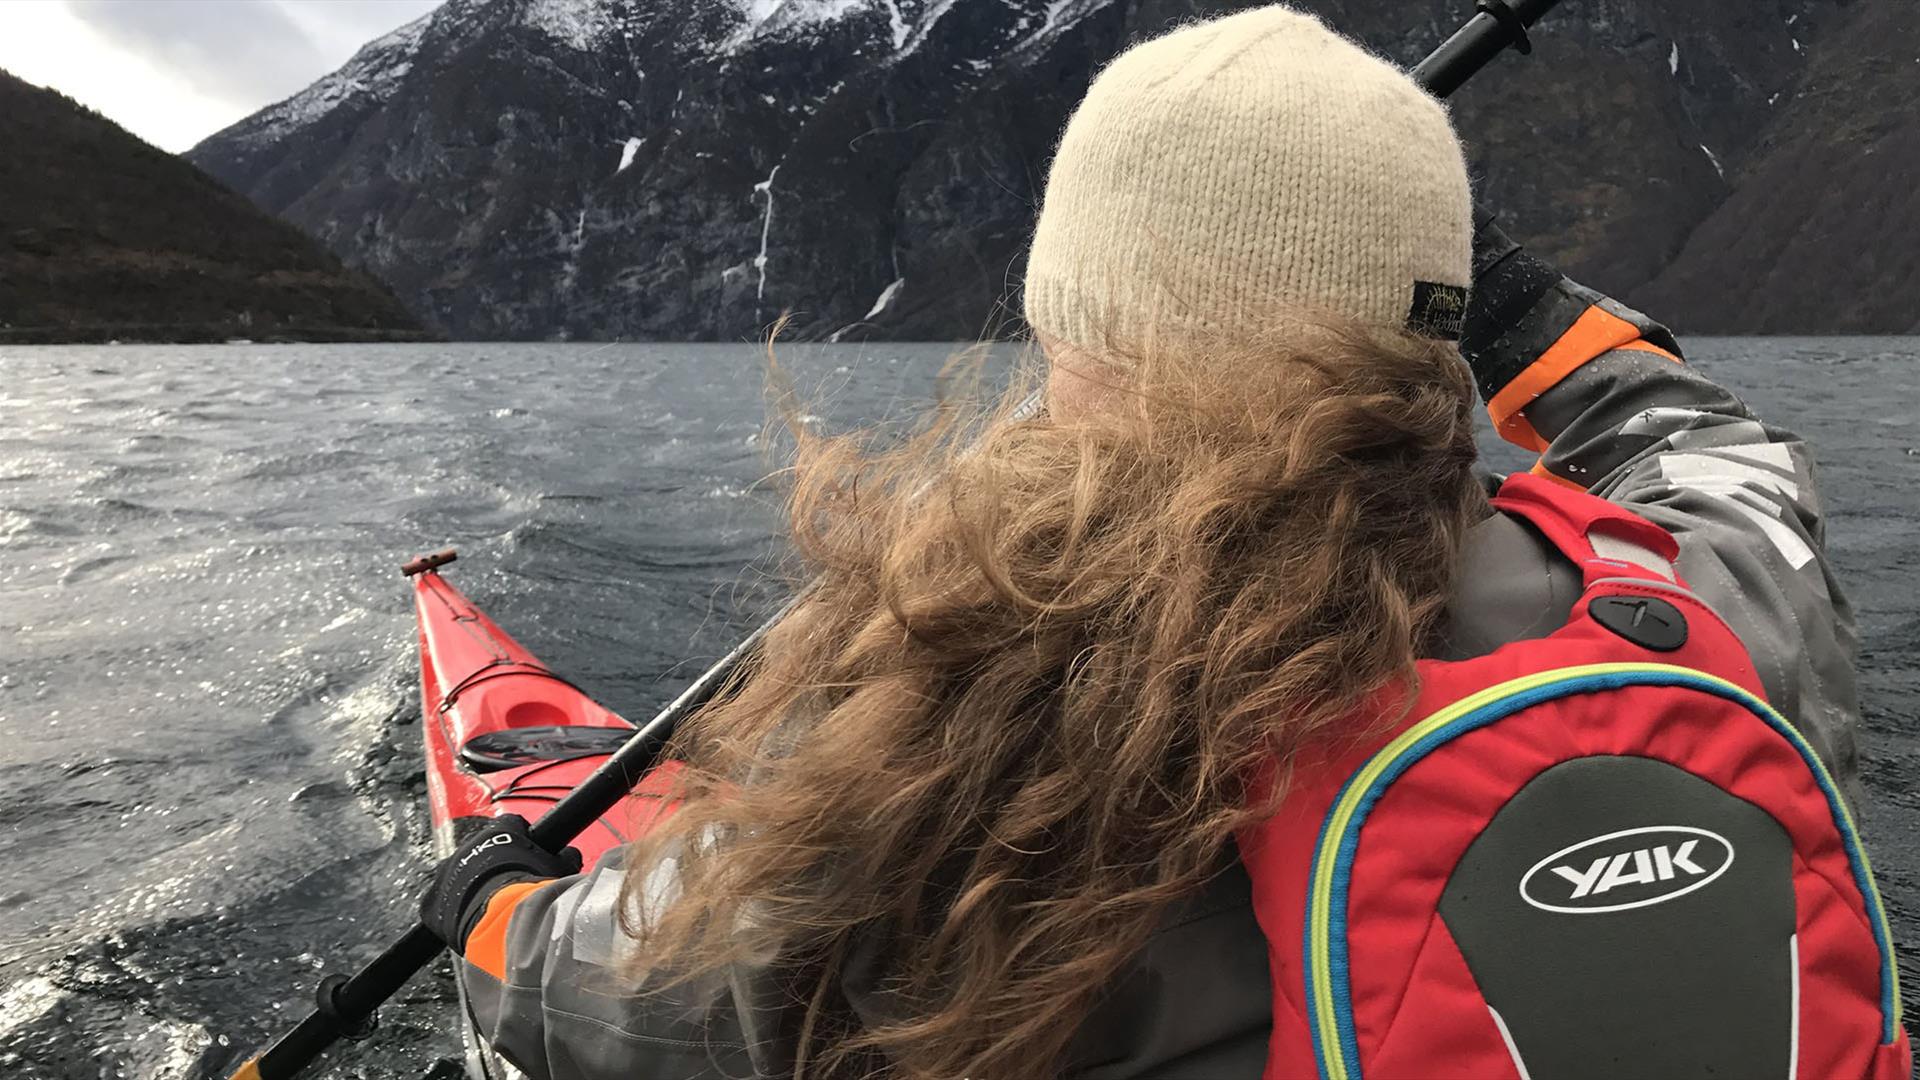 A lady with long curly hair and a woolen hat in a red kayak on a fjord in windy and cold weather.